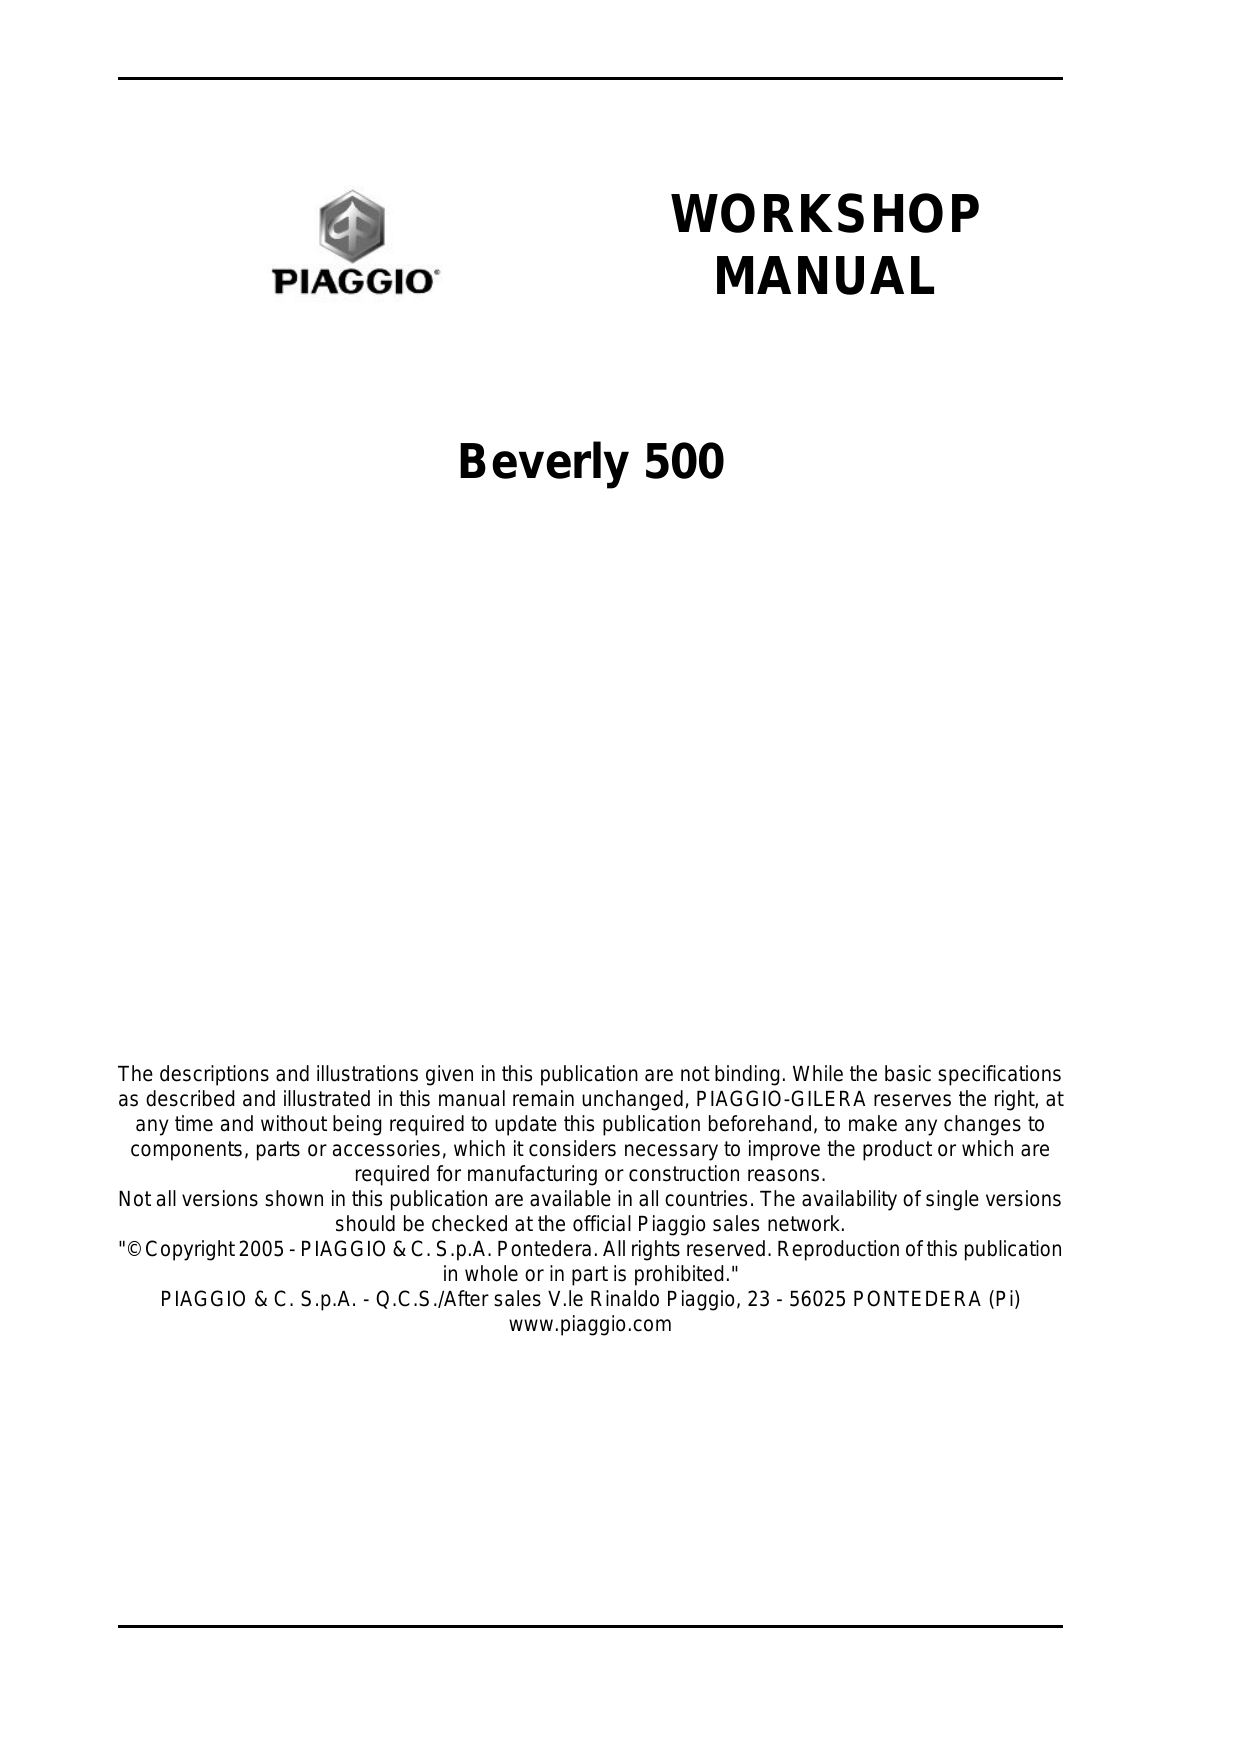 Piaggio Beverly 500 workshop manual Preview image 2